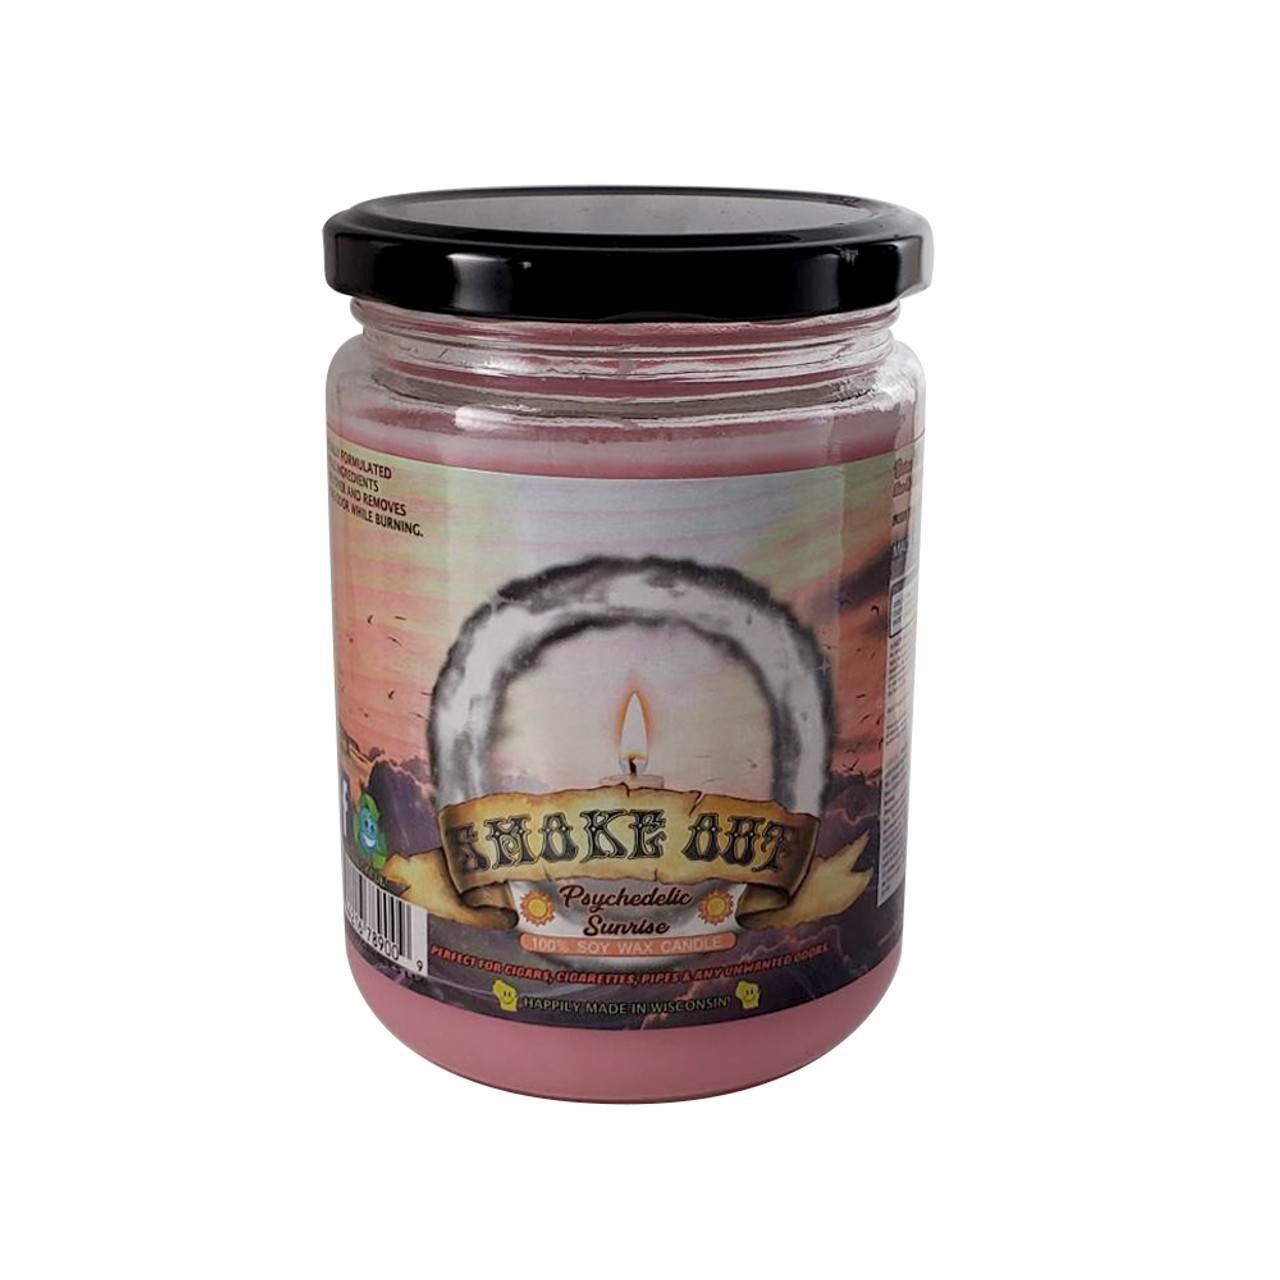 Smoke Odor Smoke Out Candles - Psychedelic Sunrise